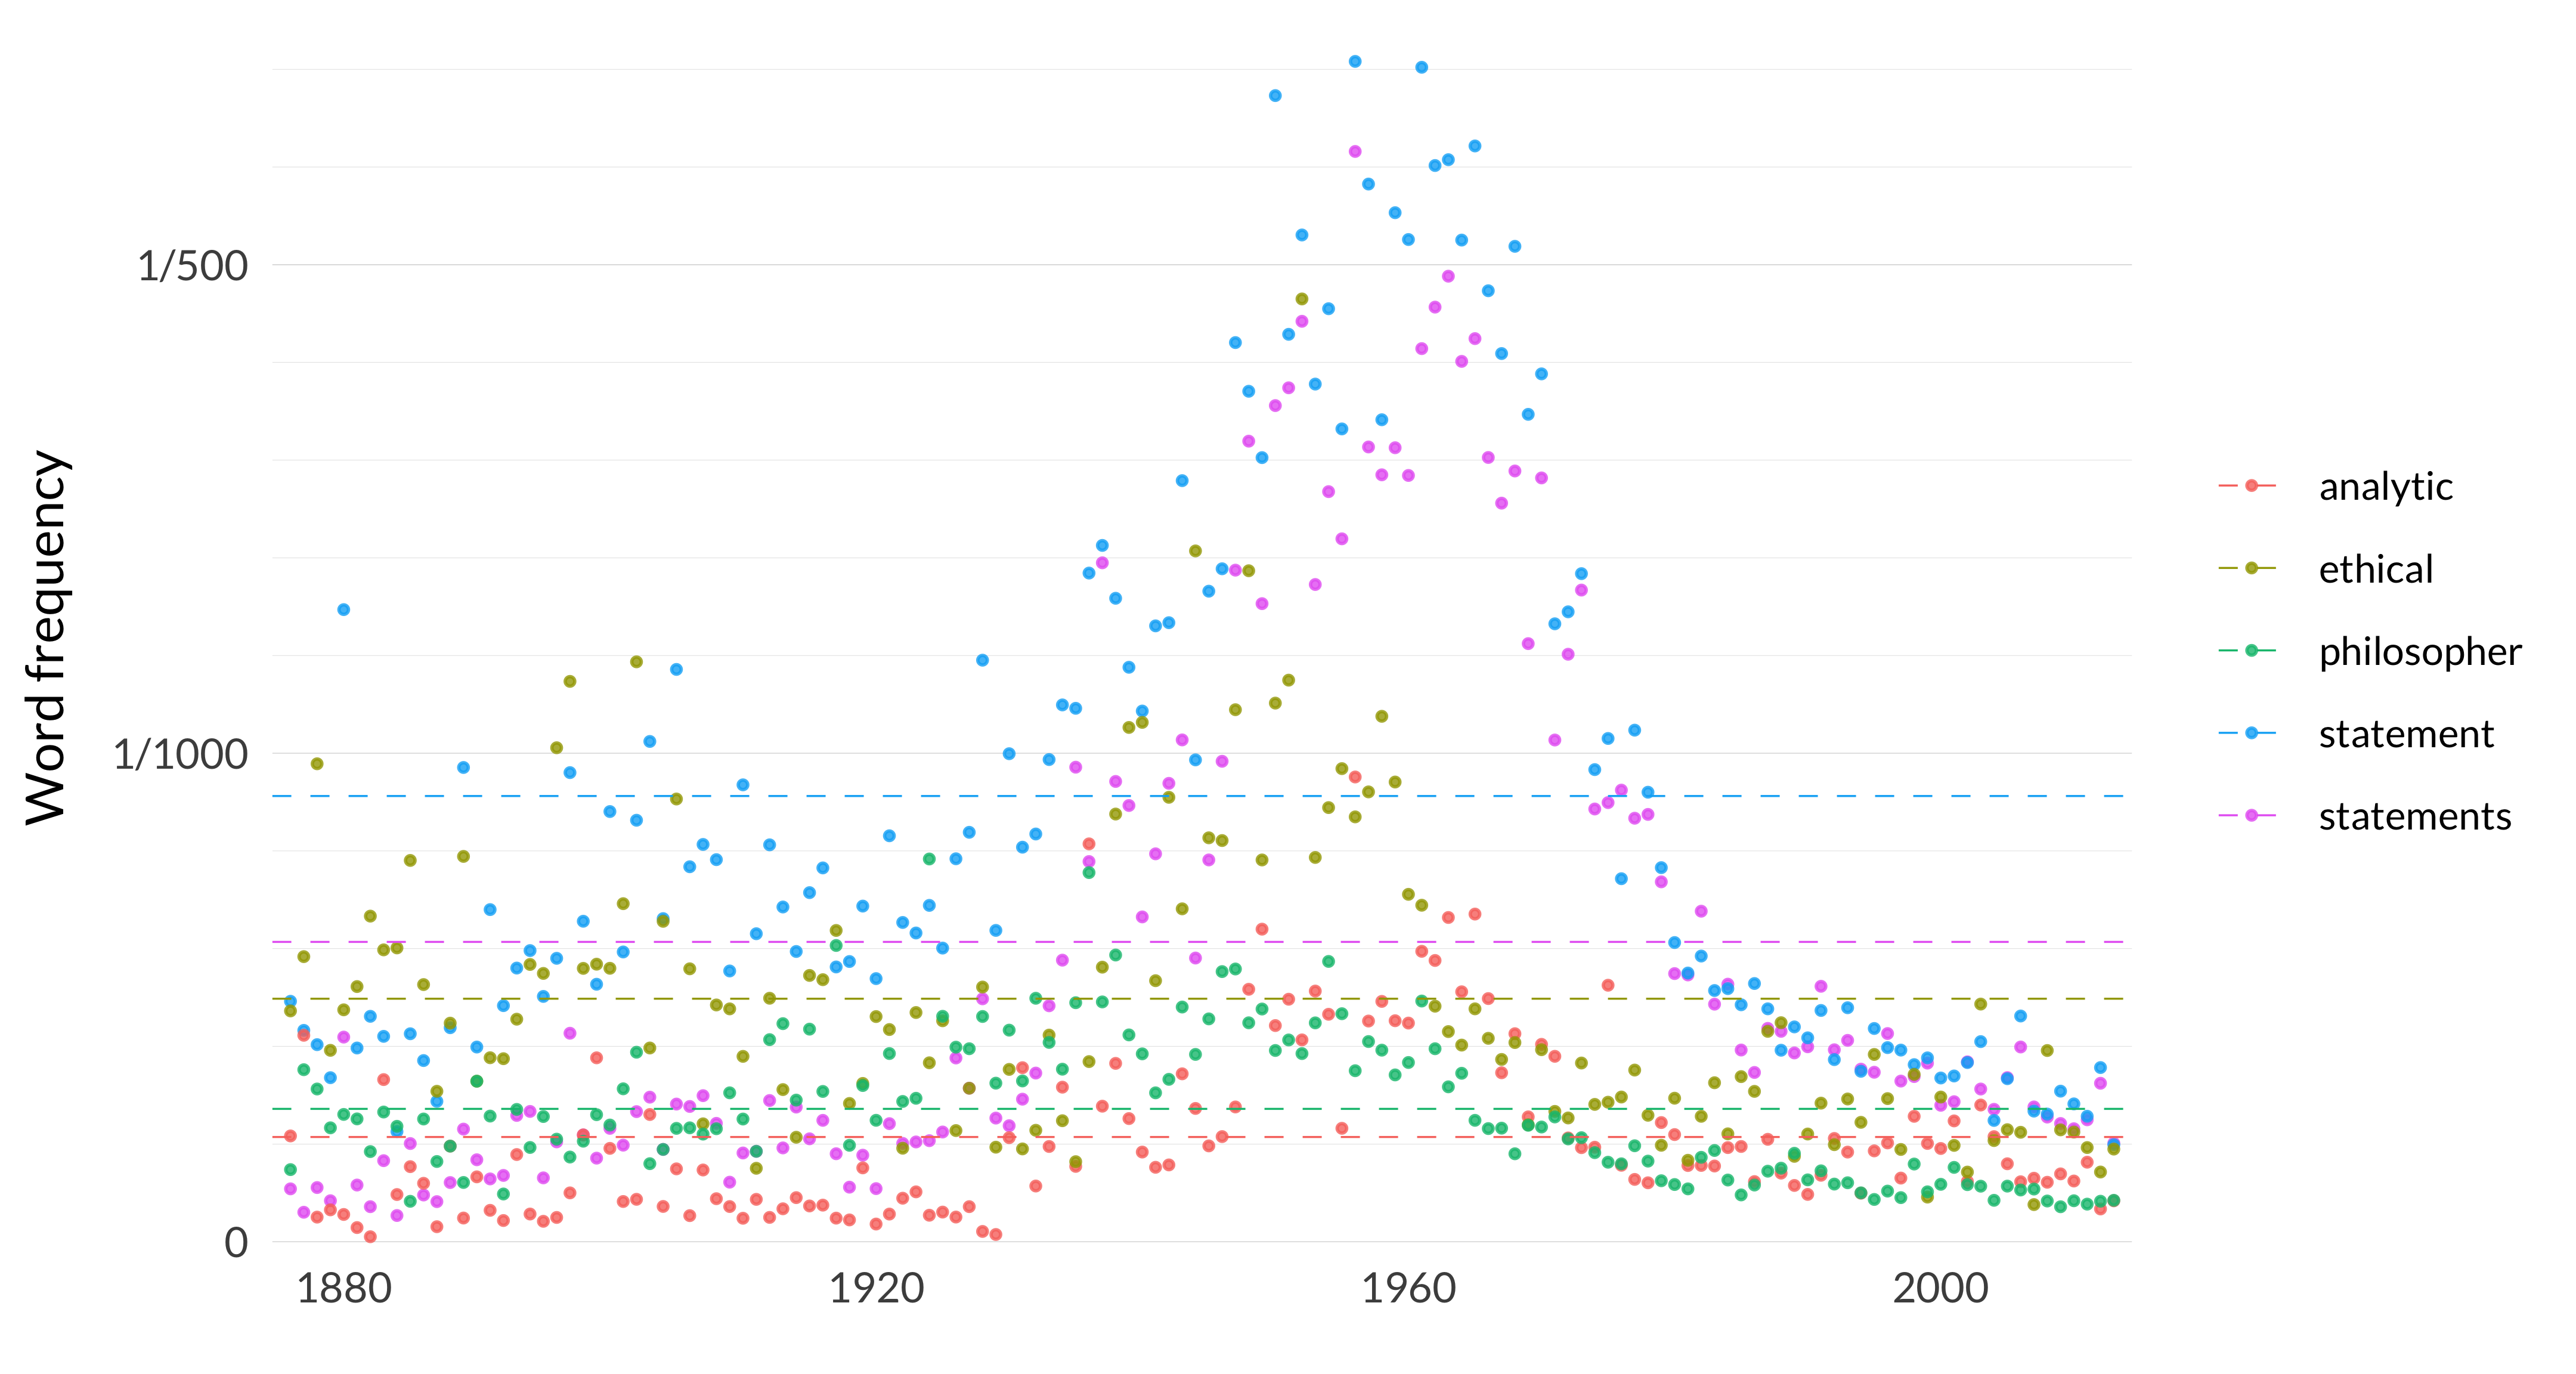 A scatterplot showing the frequency of the words statements, statement, analytic, ethical, philosopher. The word statements appears, on average across the years, 614 times per million words, and in the median year, it appears 350 times per million words. Its most frequent occurrence is in 1956 when it appears 2232 times per million words, and its least frequent occurrence is in 1884 when it appears 54 times per million words. The word statement appears, on average across the years, 912 times per million words, and in the median year, it appears 688 times per million words. Its most frequent occurrence is in 1956 when it appears 2416 times per million words, and its least frequent occurrence is in 2013 when it appears 199 times per million words. The word analytic appears, on average across the years, 214 times per million words, and in the median year, it appears 157 times per million words. Its most frequent occurrence is in 1956 when it appears 951 times per million words, and its least frequent occurrence is in 1882 when it appears 10 times per million words. The word ethical appears, on average across the years, 498 times per million words, and in the median year, it appears 412 times per million words. Its most frequent occurrence is in 1952 when it appears 1930 times per million words, and its least frequent occurrence is in 2007 when it appears 76 times per million words. The word philosopher appears, on average across the years, 272 times per million words, and in the median year, it appears 244 times per million words. Its most frequent occurrence is in 1924 when it appears 784 times per million words, and its least frequent occurrence is in 2009 when it appears 72 times per million words. 